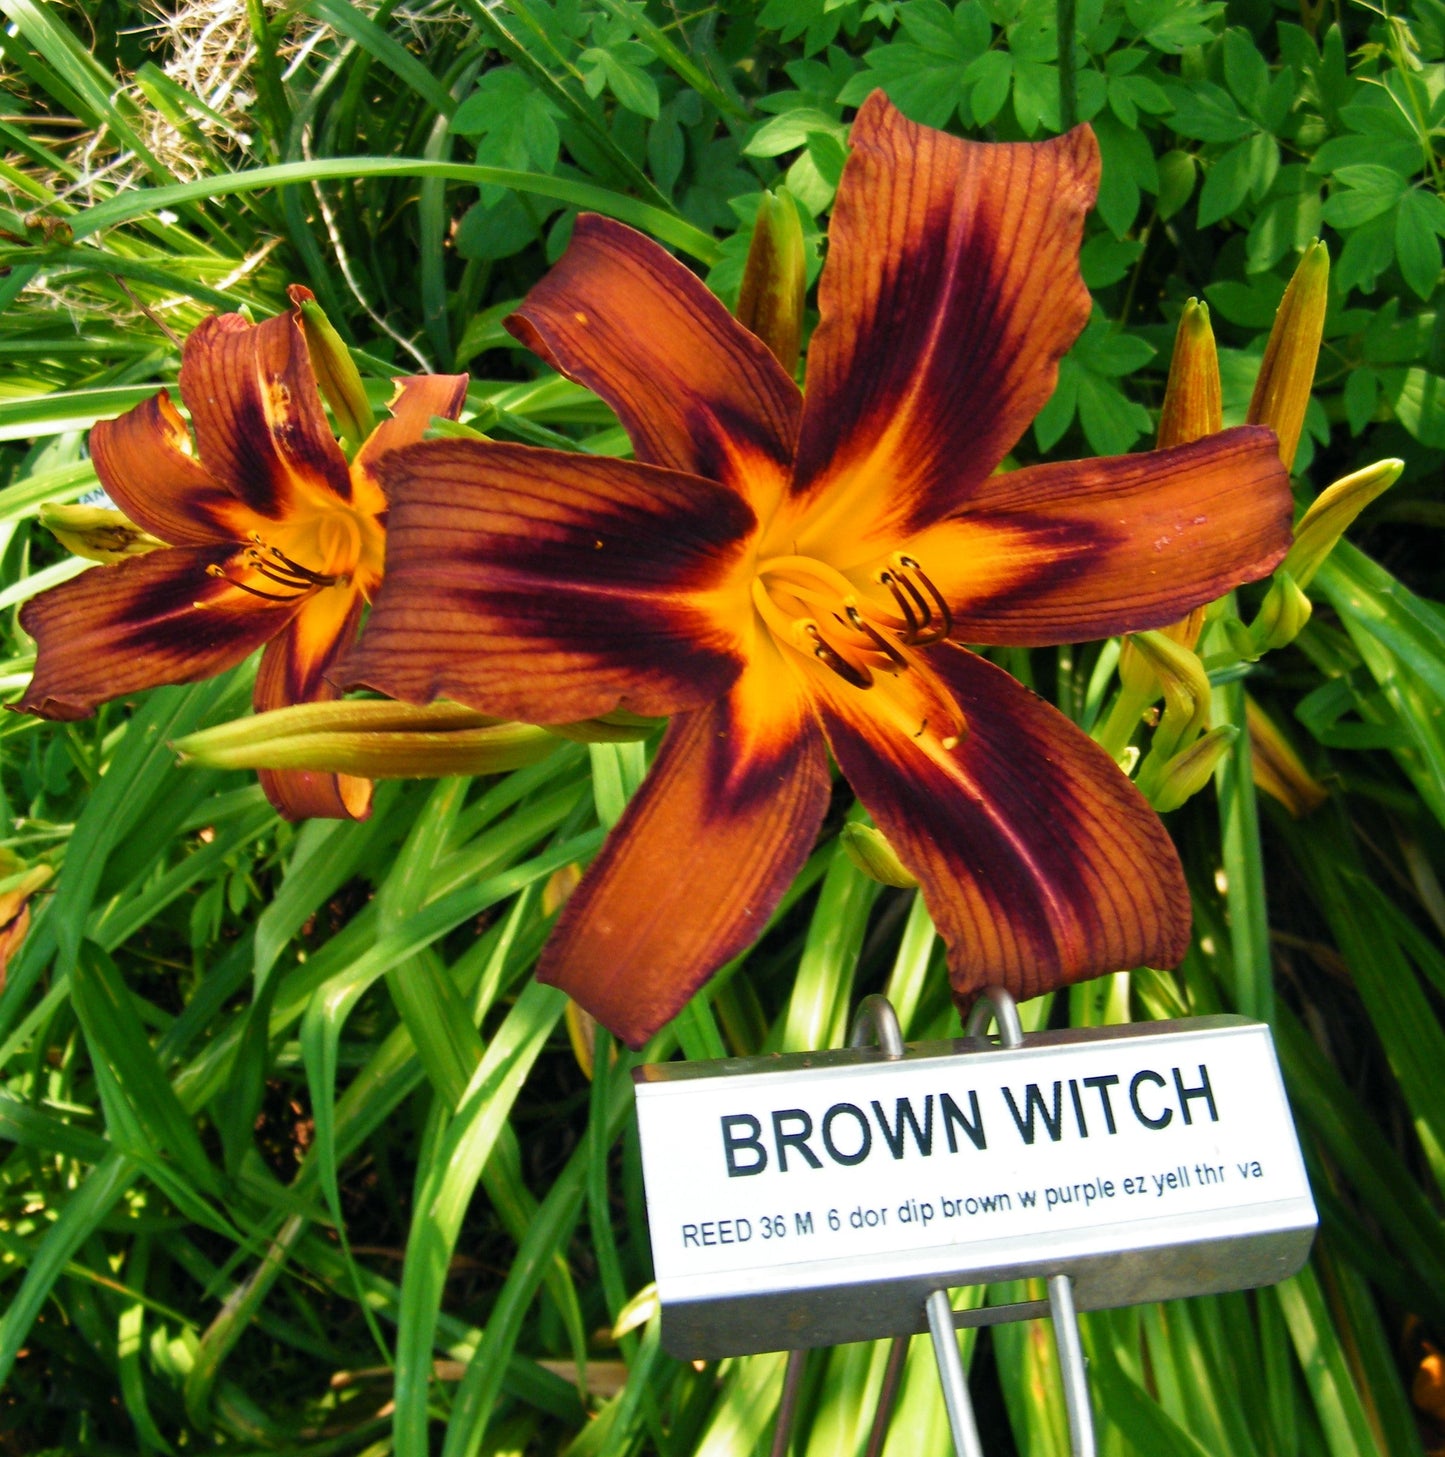 BROWN WITCH